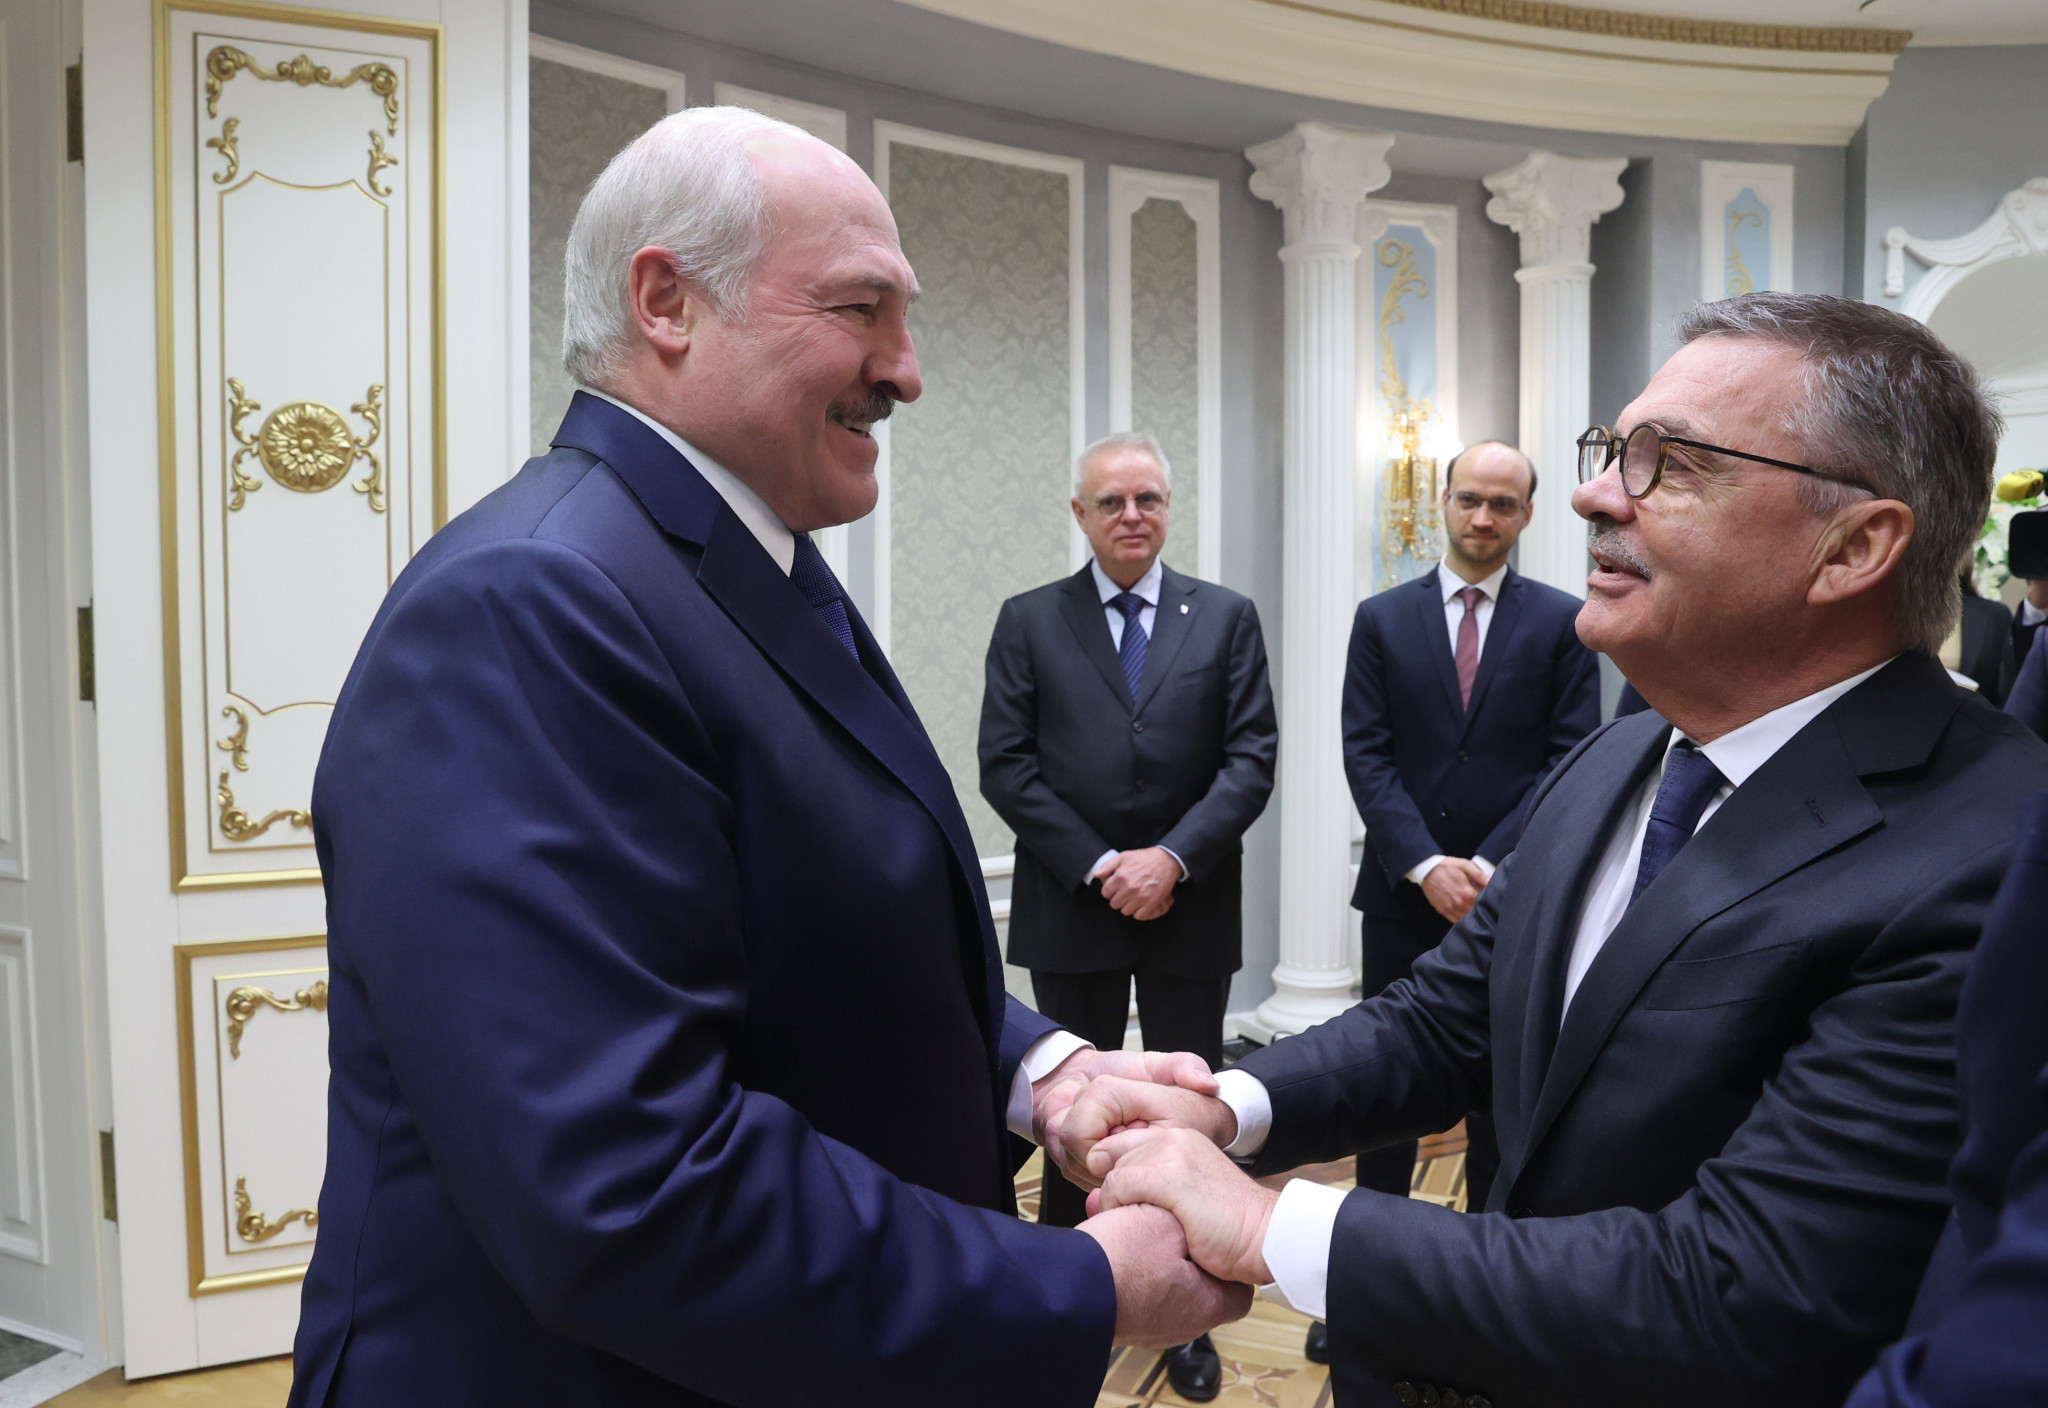 IIHF President René Fasel has insisted a recent meeting with Belarus President Alexander Lukashenko was held with "a serious tone" ©Getty Images